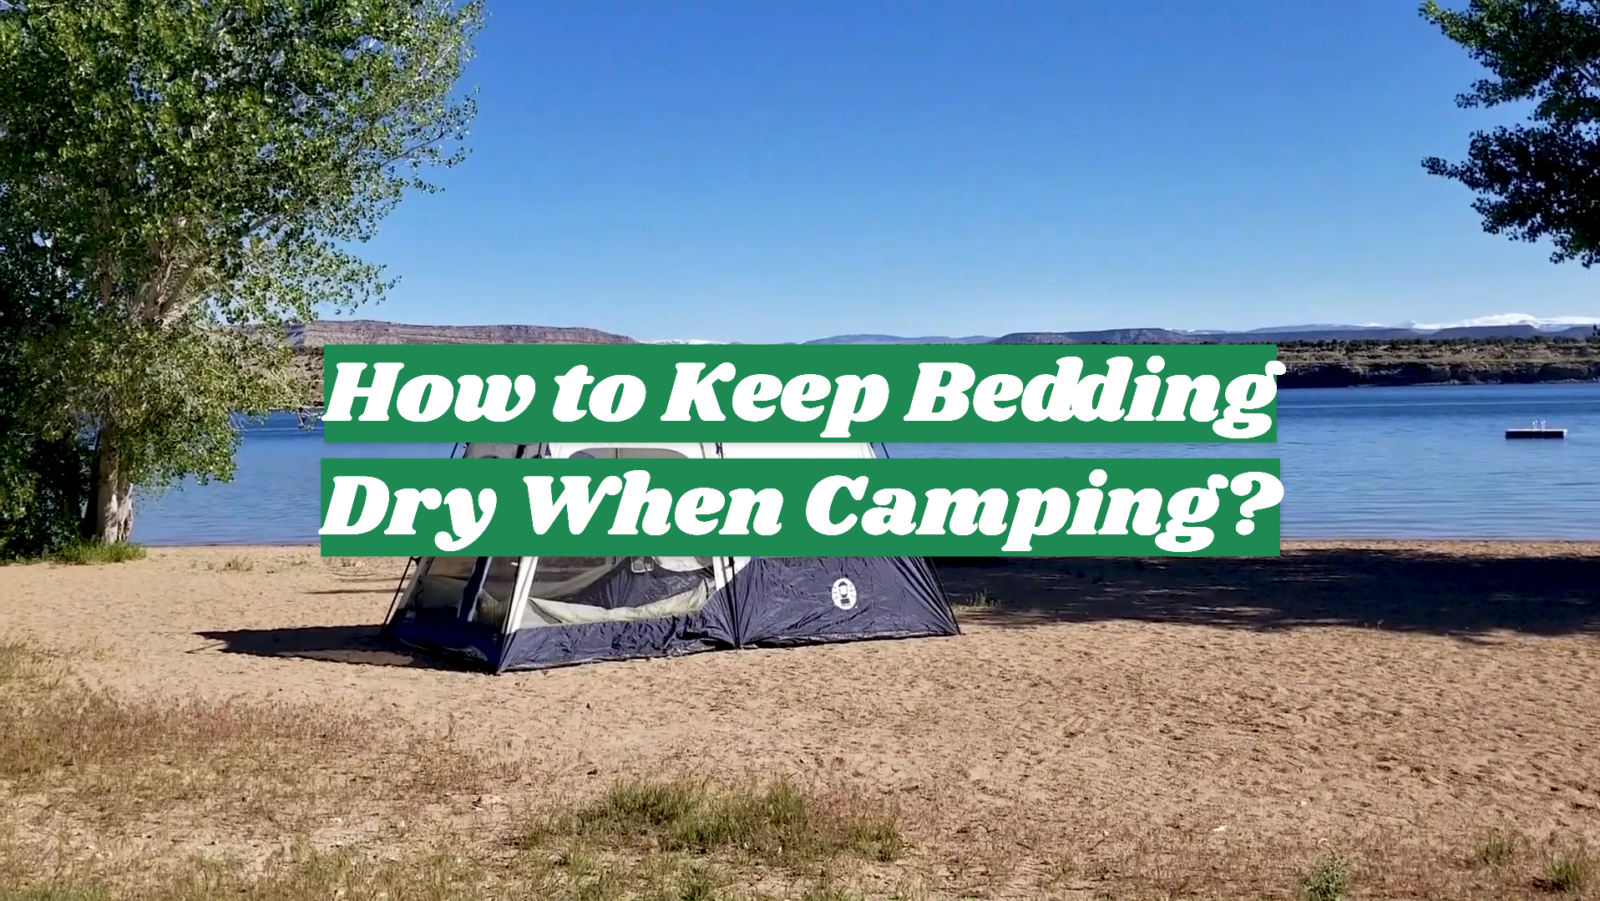 How to Keep Bedding Dry When Camping?